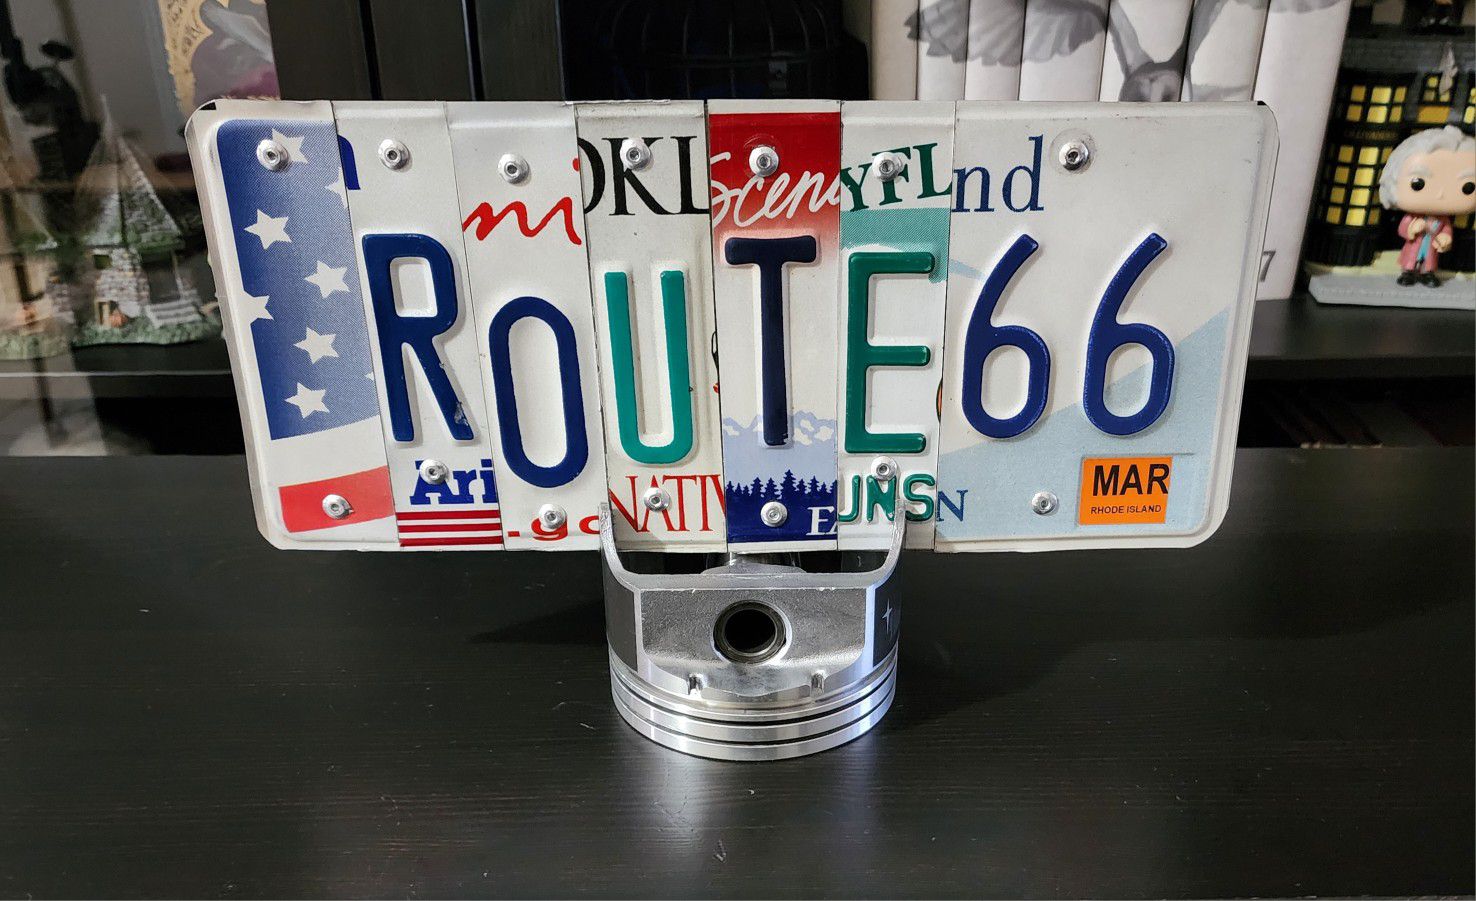 Route 66 Sign Custom Made